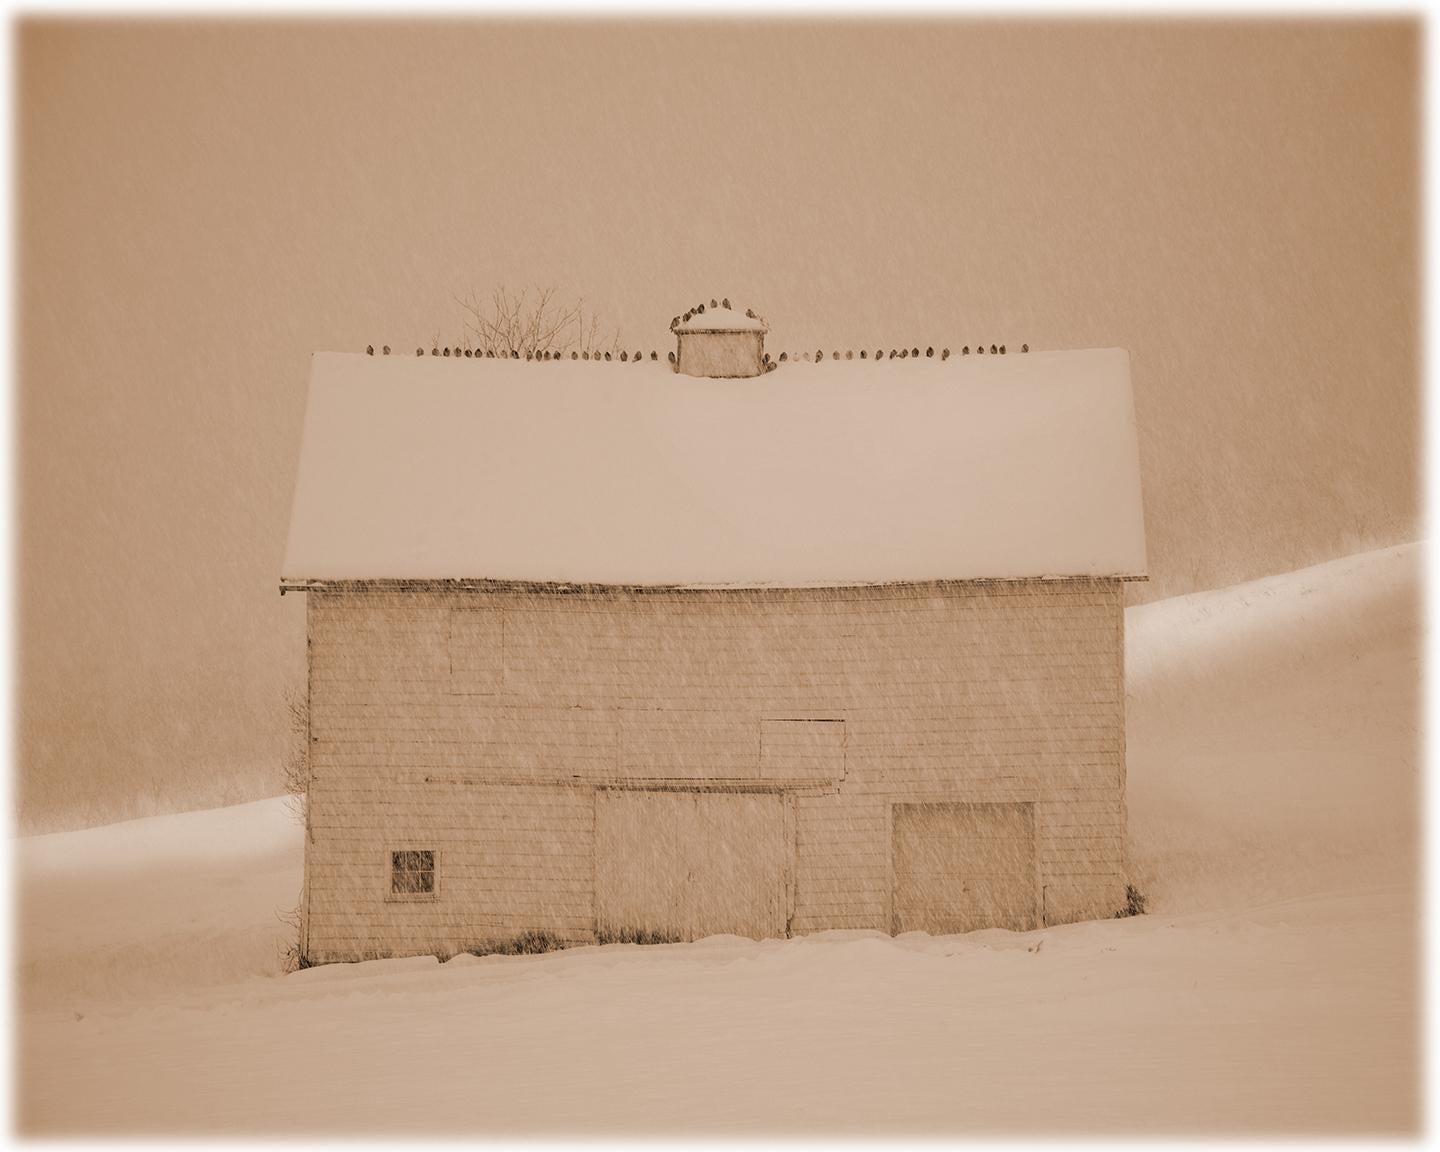 James Bleecker Landscape Photograph - Barn with Birds ( Black and White Sepia Toned Pigment Print of a Winter Scene)